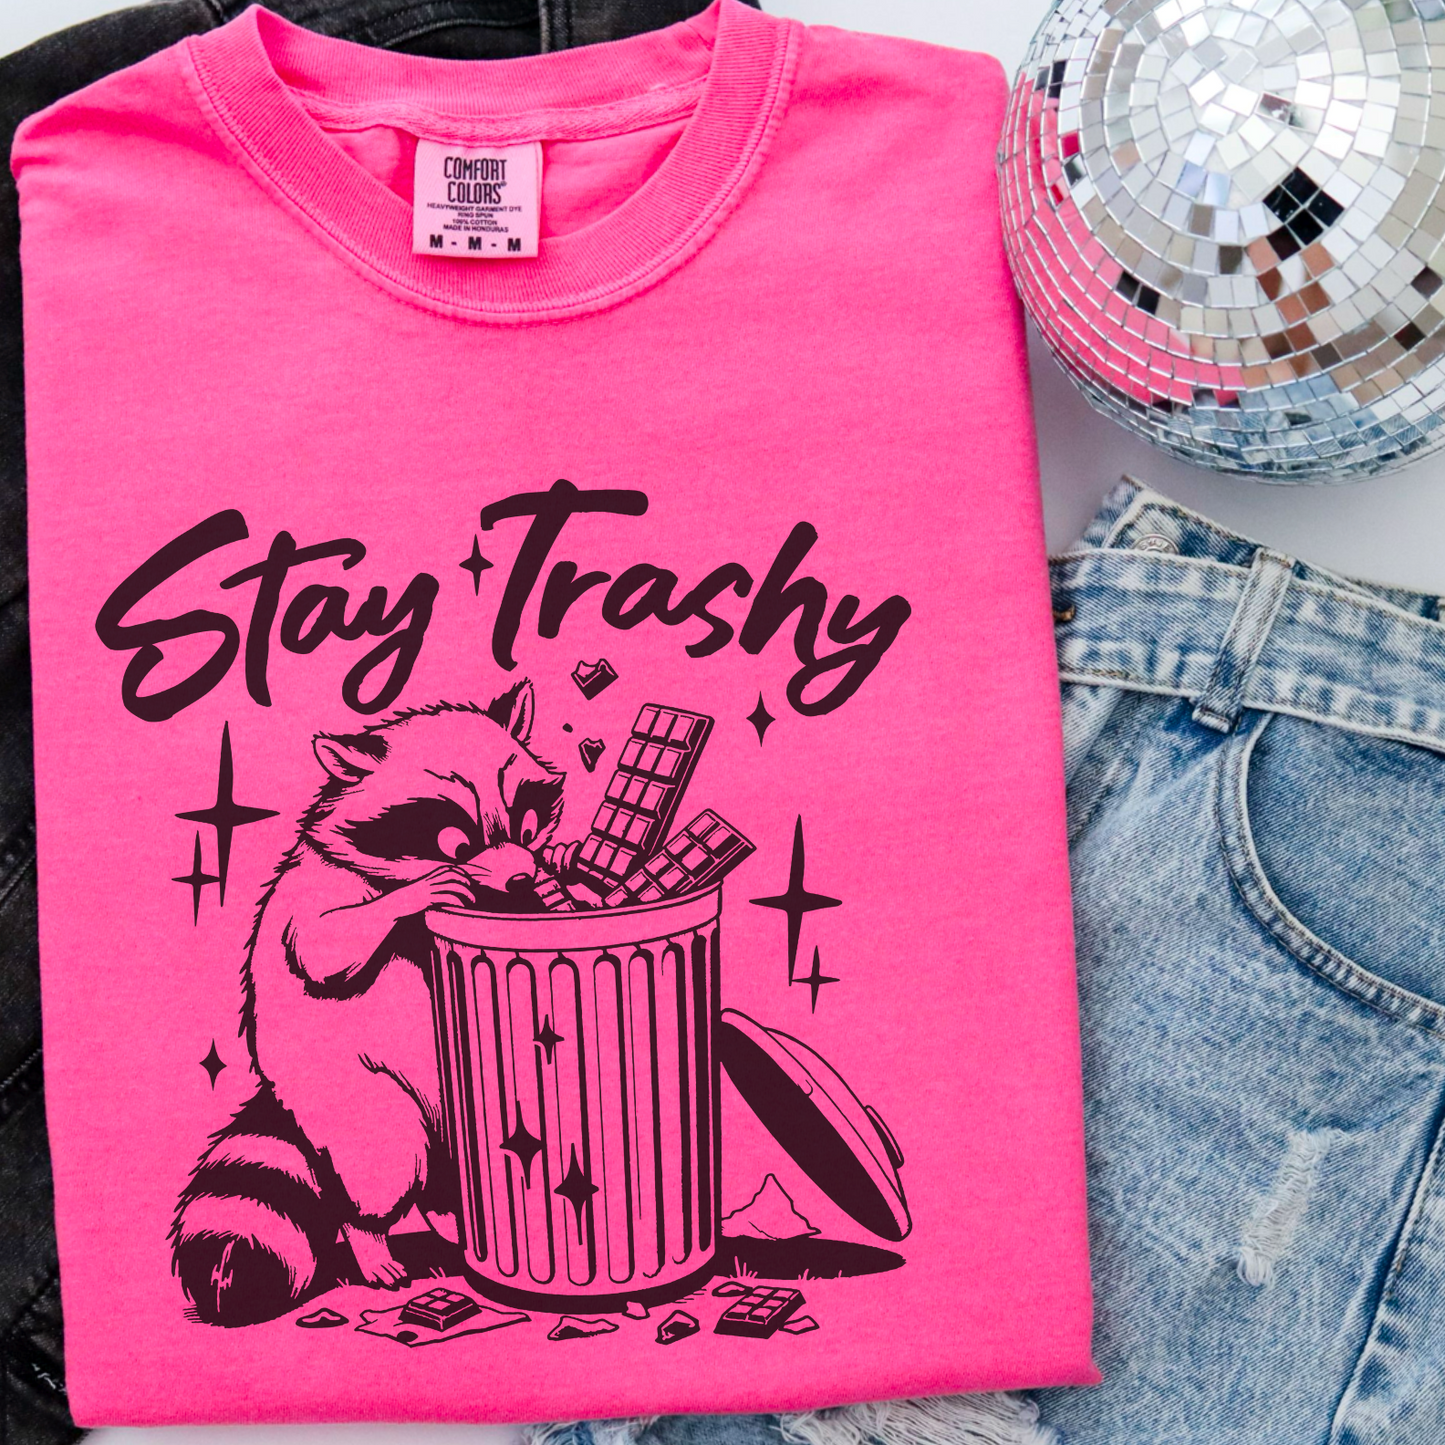 Stay Trashy Comfort Color Graphic Tee As Pictured Is Neon Pink